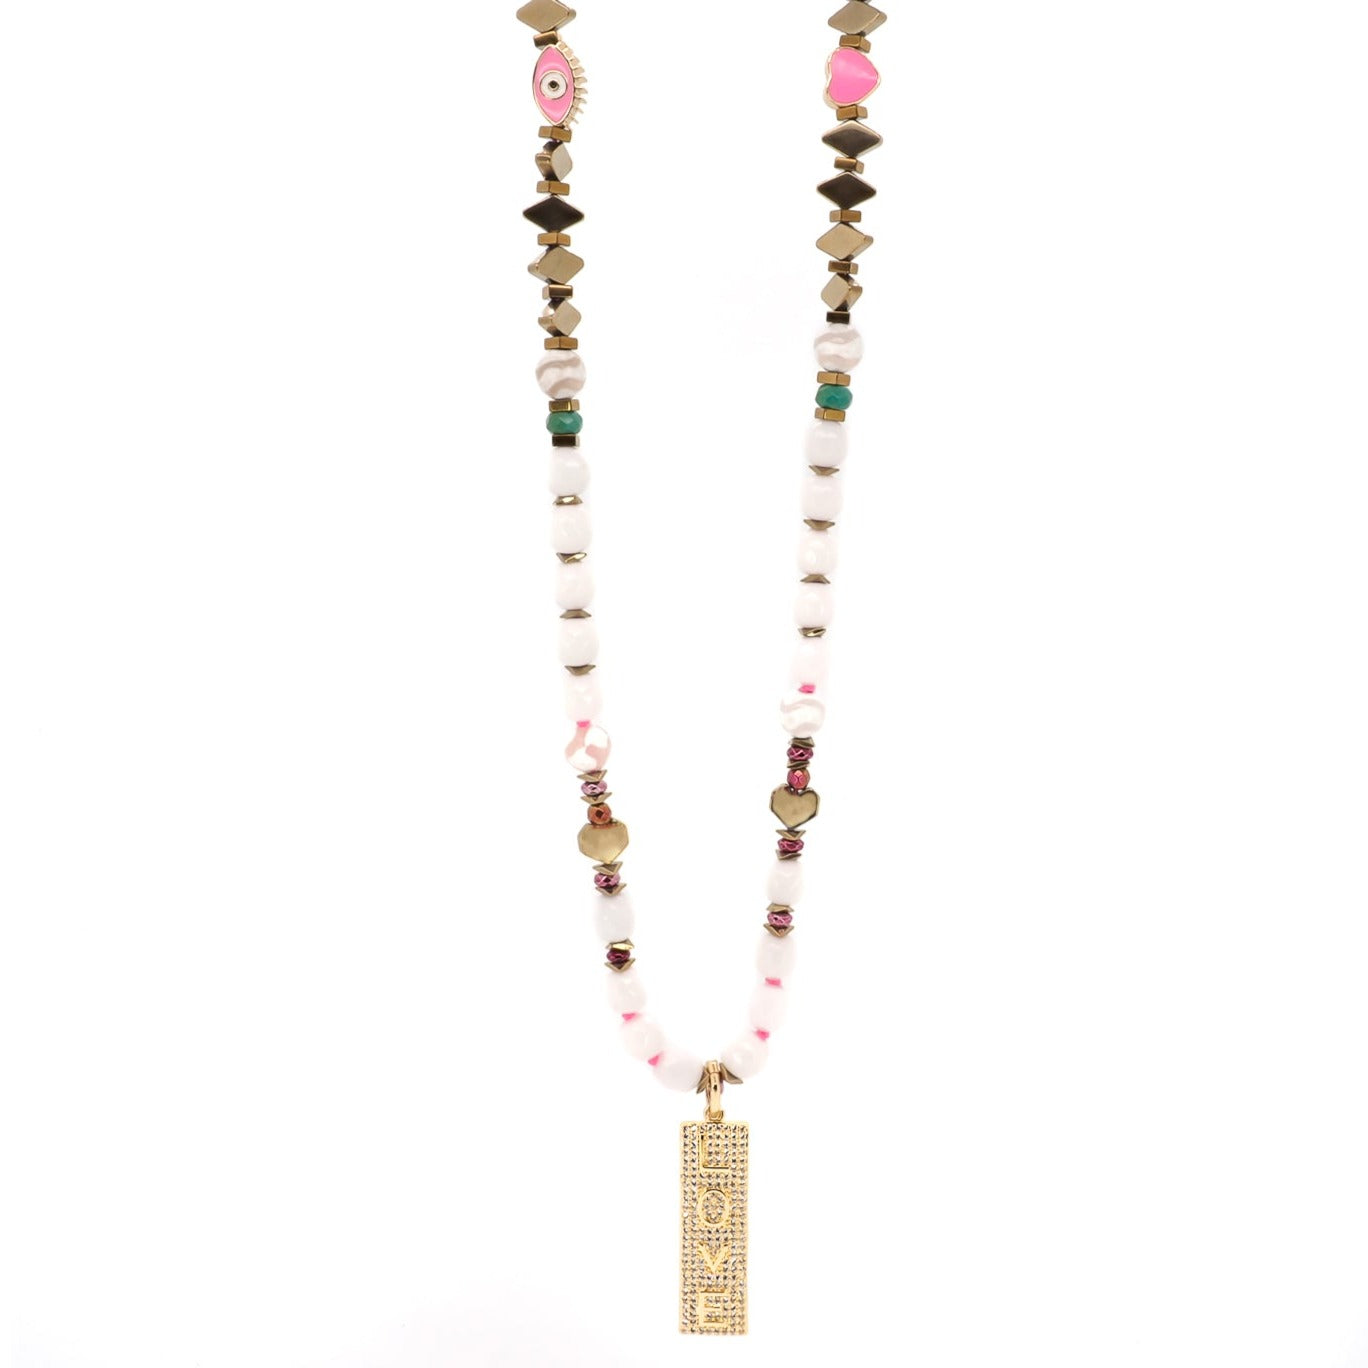 Power Of Love Necklace showcasing the beautiful combination of Jade beads, gold-plated LOVE pendant, and turquoise stone beads.